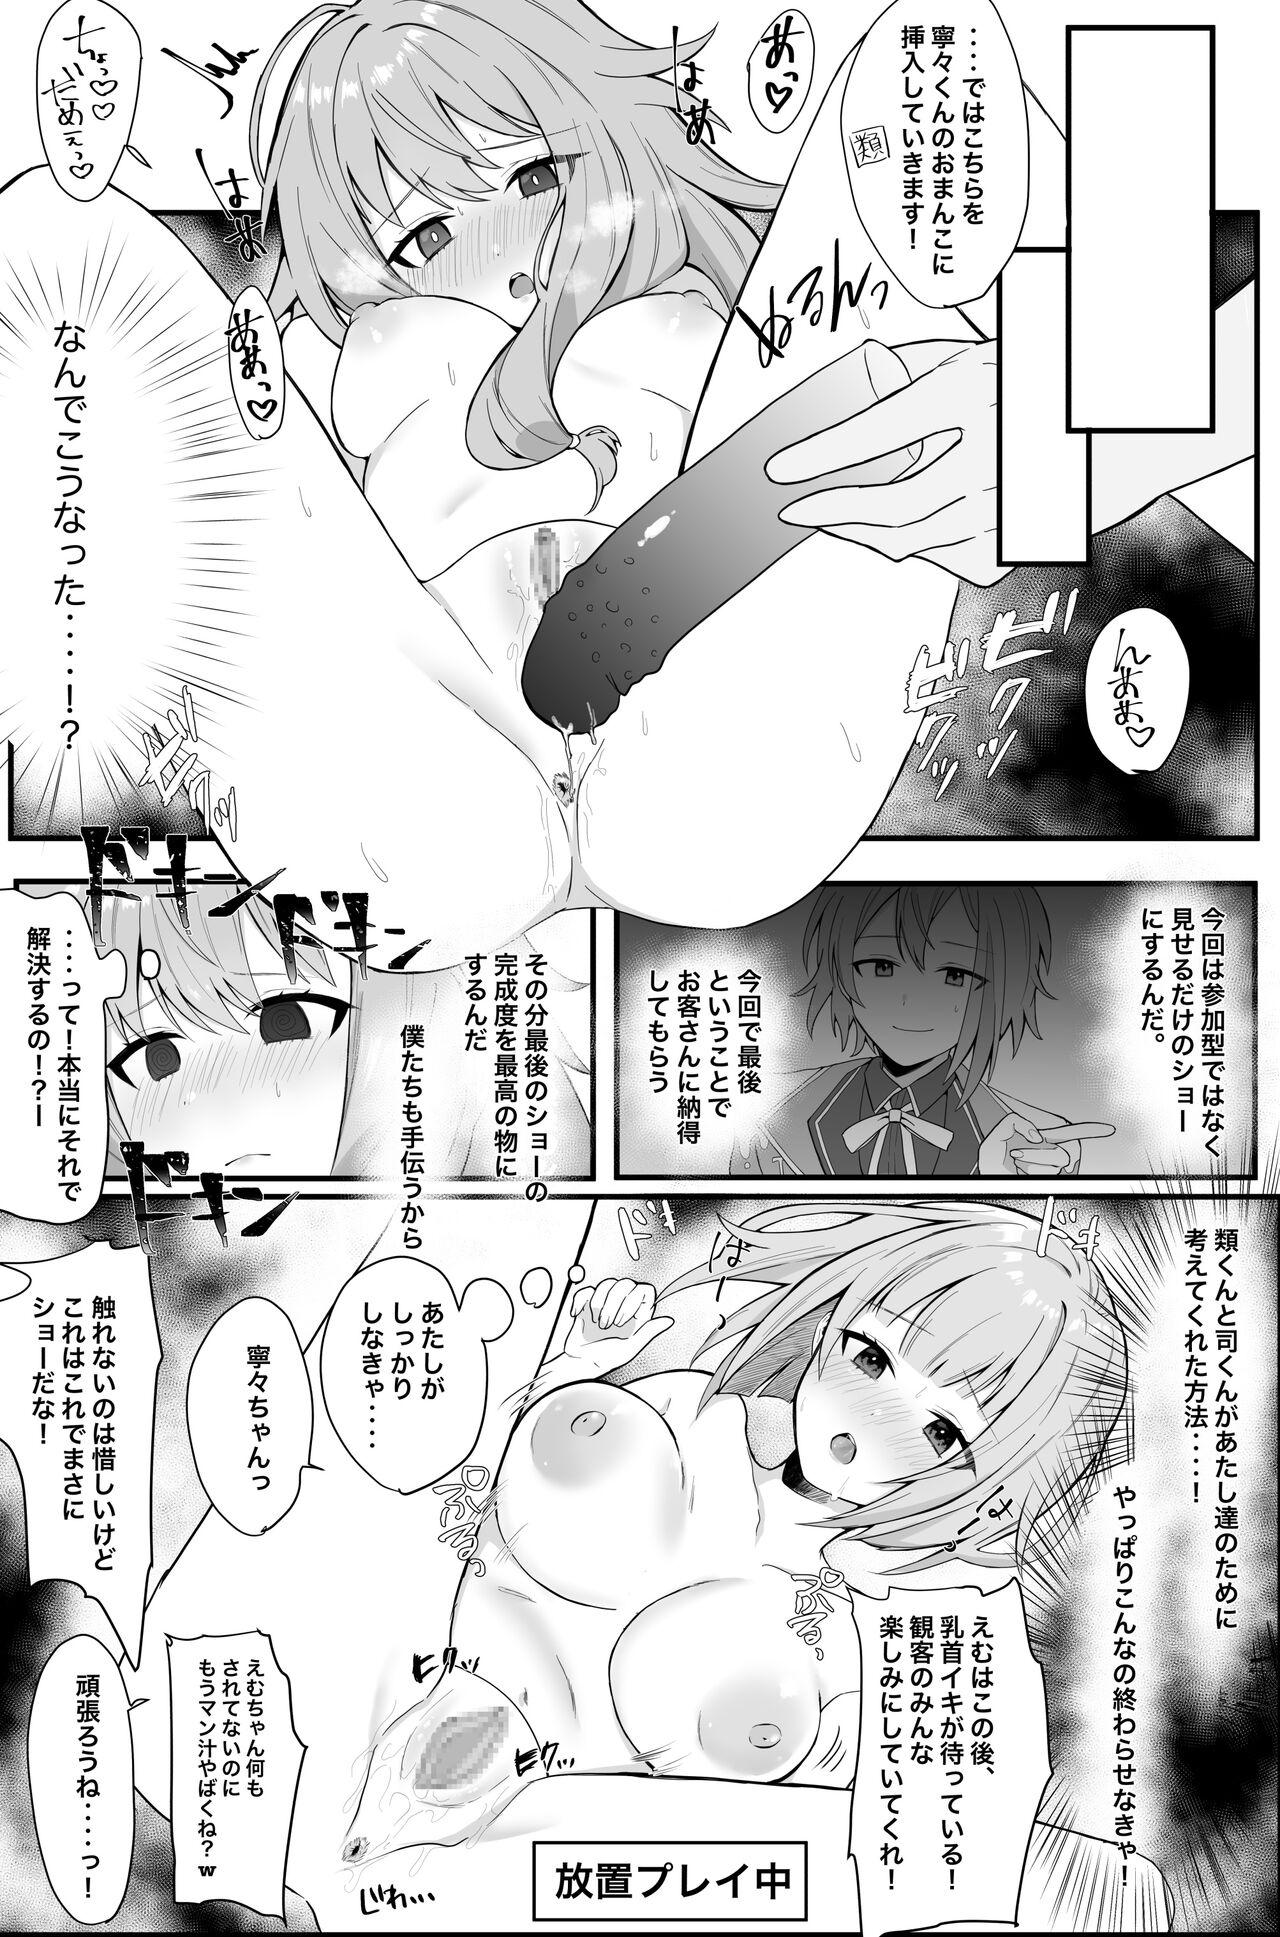 Classic えむねねちゃん決着編! - Project sekai Amateur Teen - Page 3